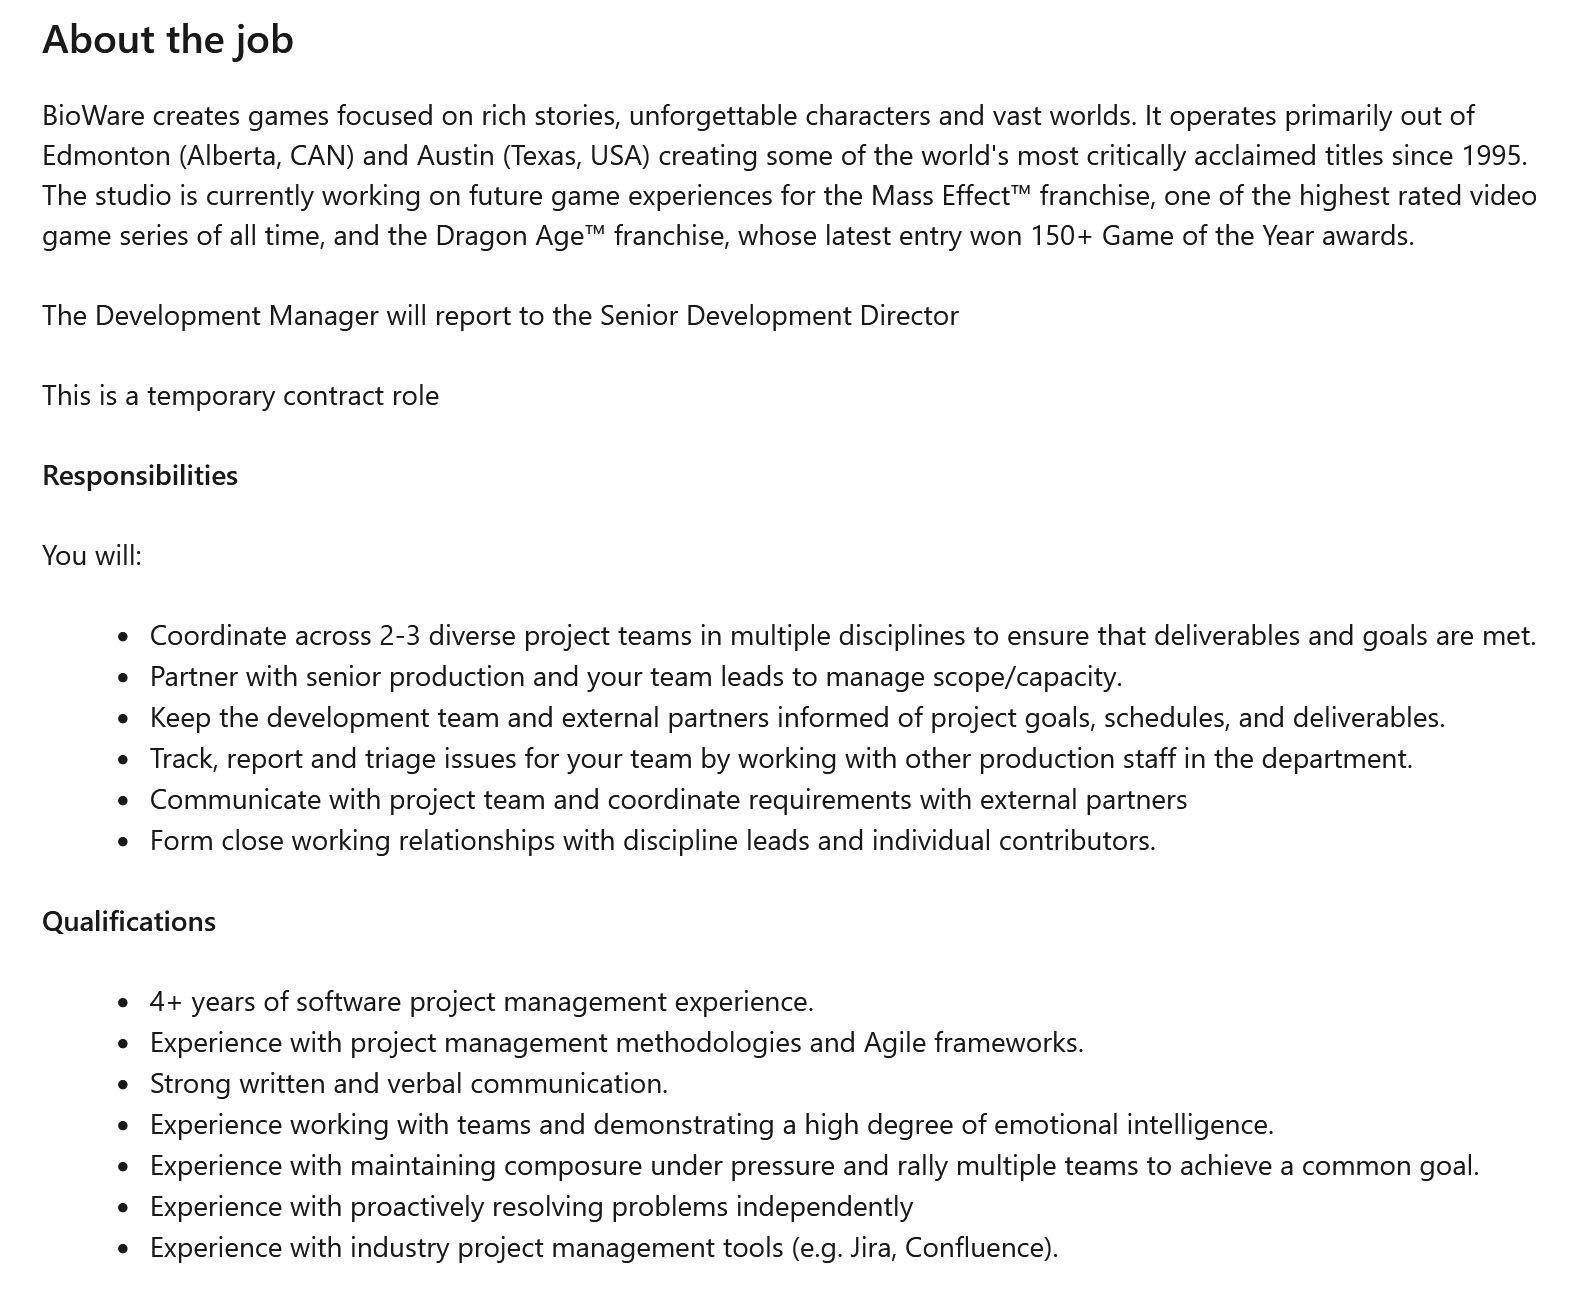 A screenshot for a job listing at BioWare, calling for a tempoary development manager.